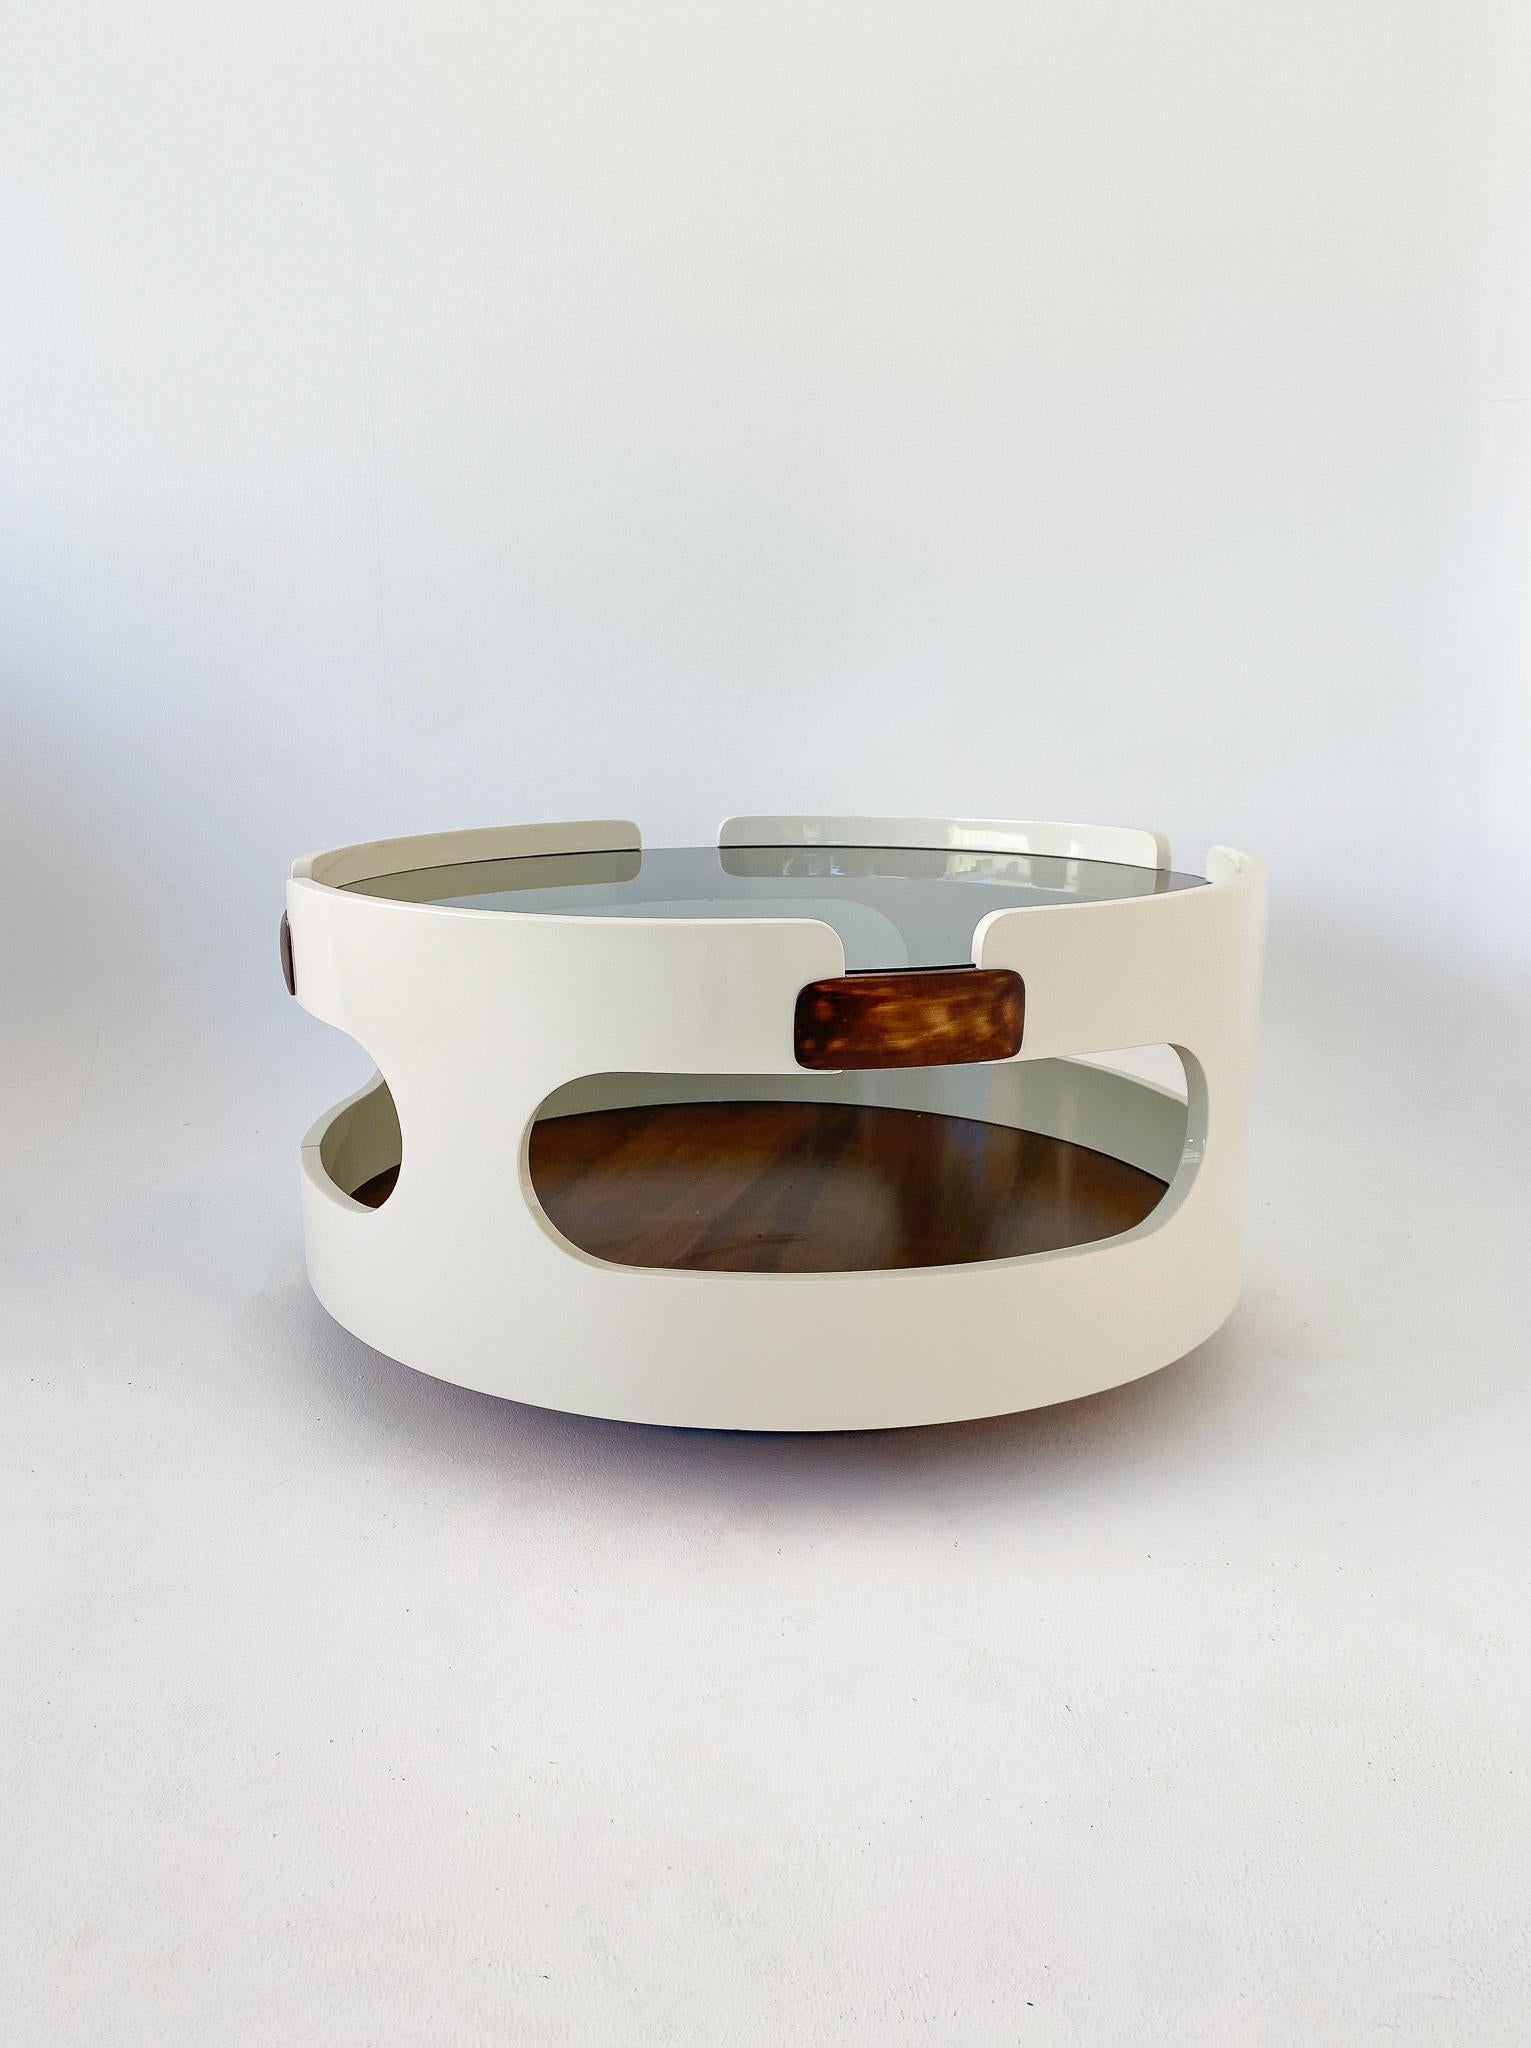 Mid Century Modern round white wooden coffee table, Italy 1970s.
 
This lovely coffee table features a characteristic round form in laquered white wood with cut outs and wonderful brown wooden elements. The top of the table is made of grey smoked